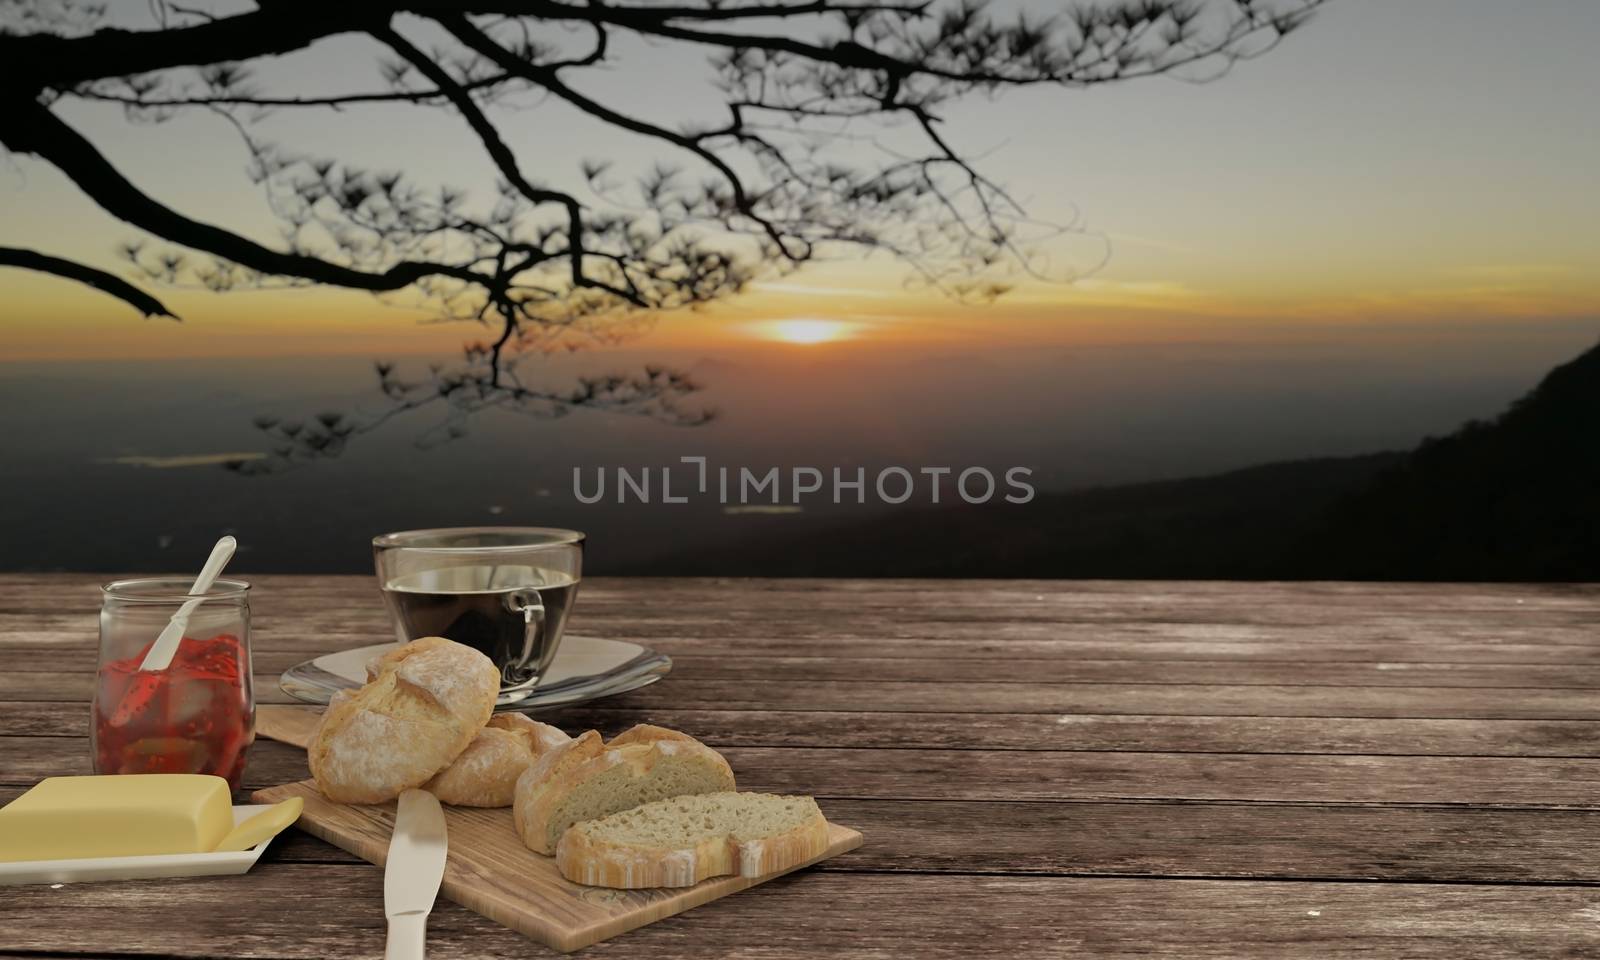 Home made bread on butcher and black coffee  in clear glass for breakfast  concept on wooden table.   Background blur mountian view and sunrise. 3D rendering.